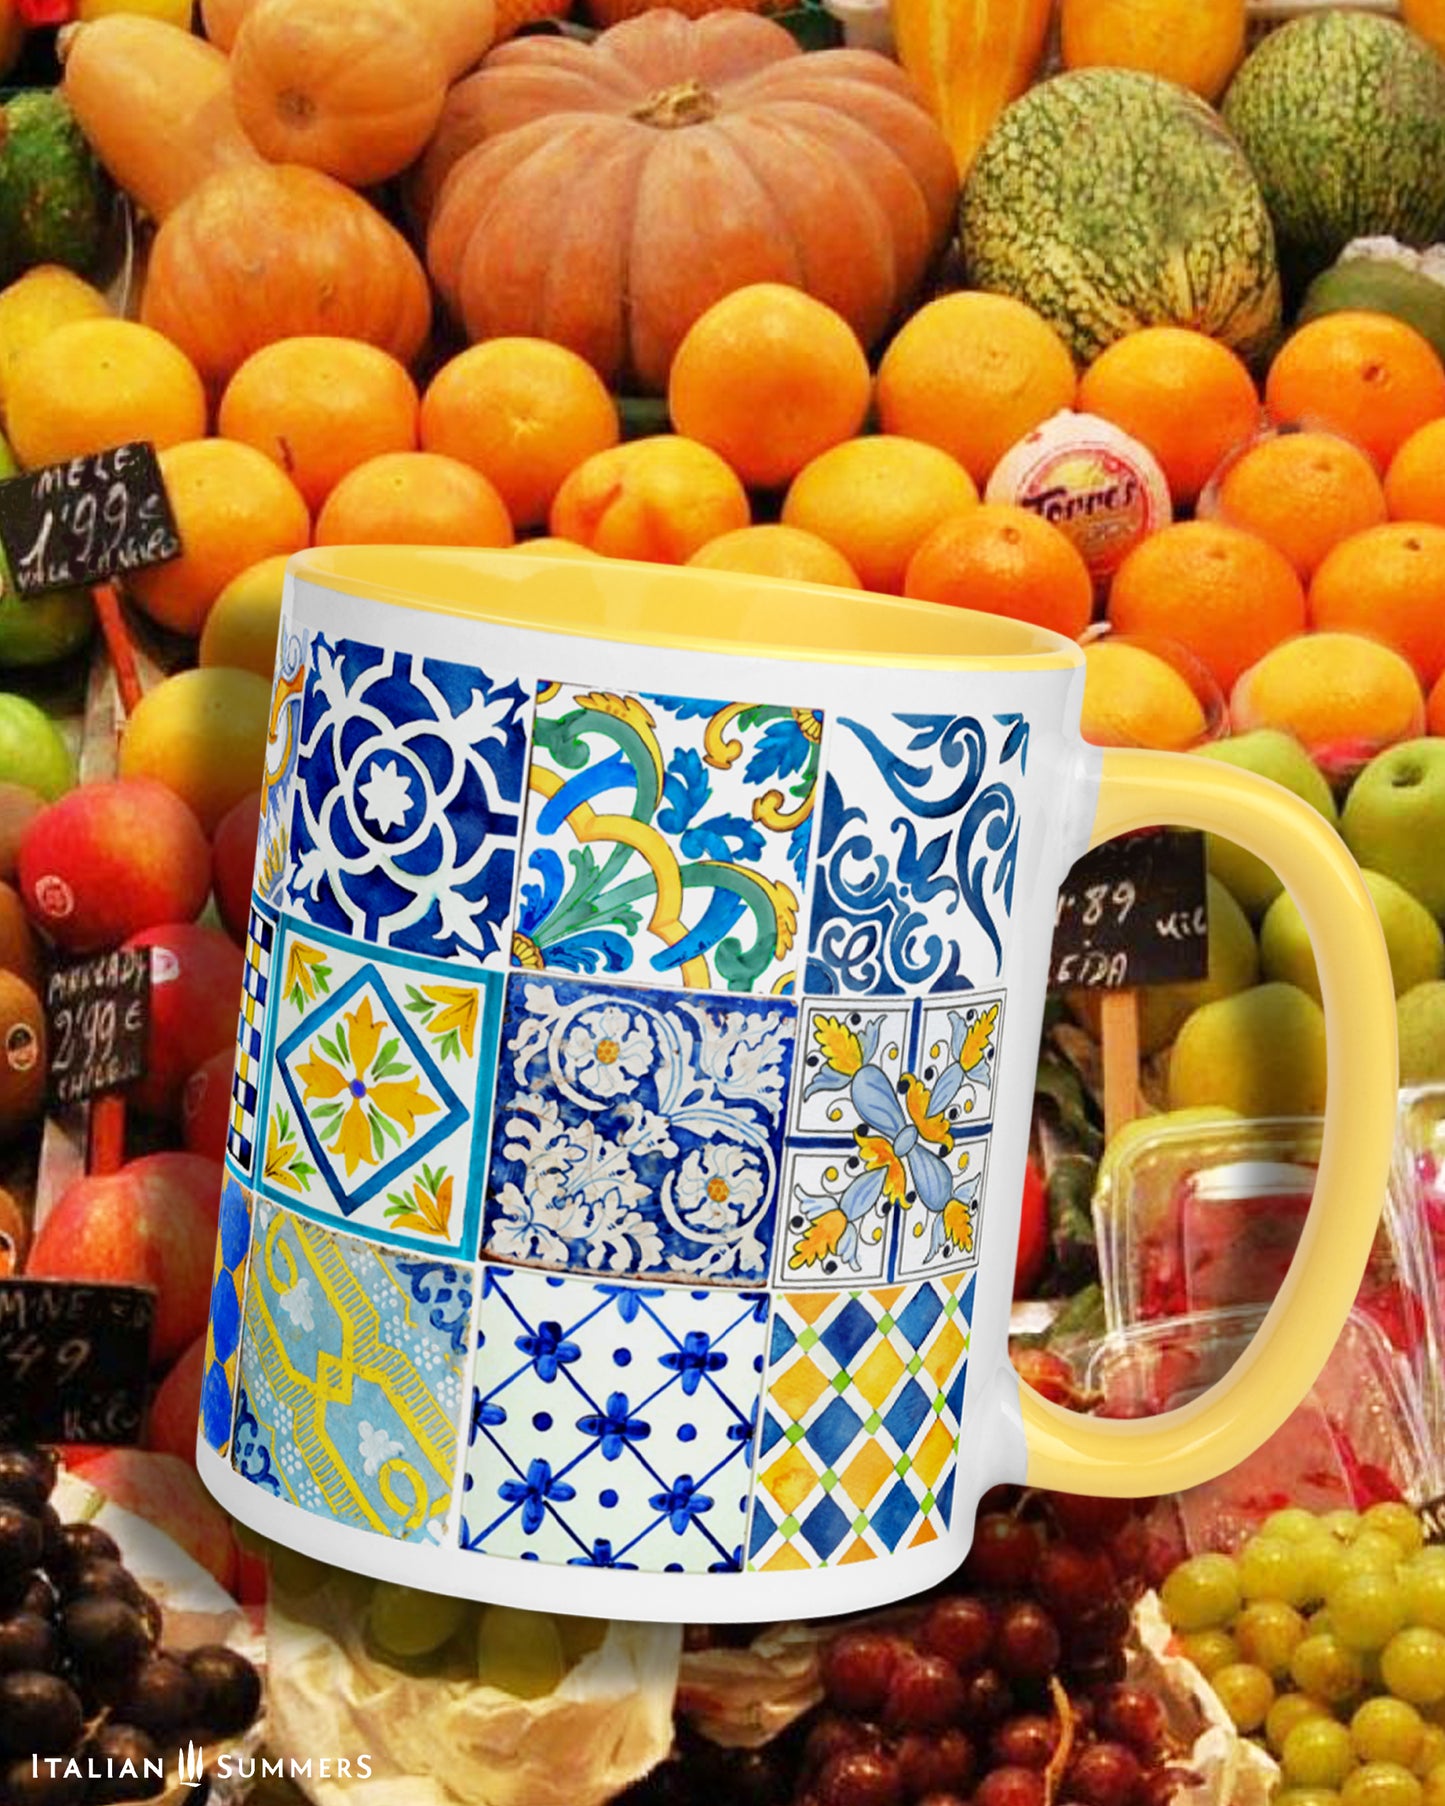 Italy inspired mug with colorful Italian Sicilian tiles on all the sides oif the mug, Italian Sicilian tiles with main colors blue and yellow, 3 rows of Sicilian Italian maiolica tiles. Inside and handle of the mug available in yellow and blue. Made by Italian Summers.